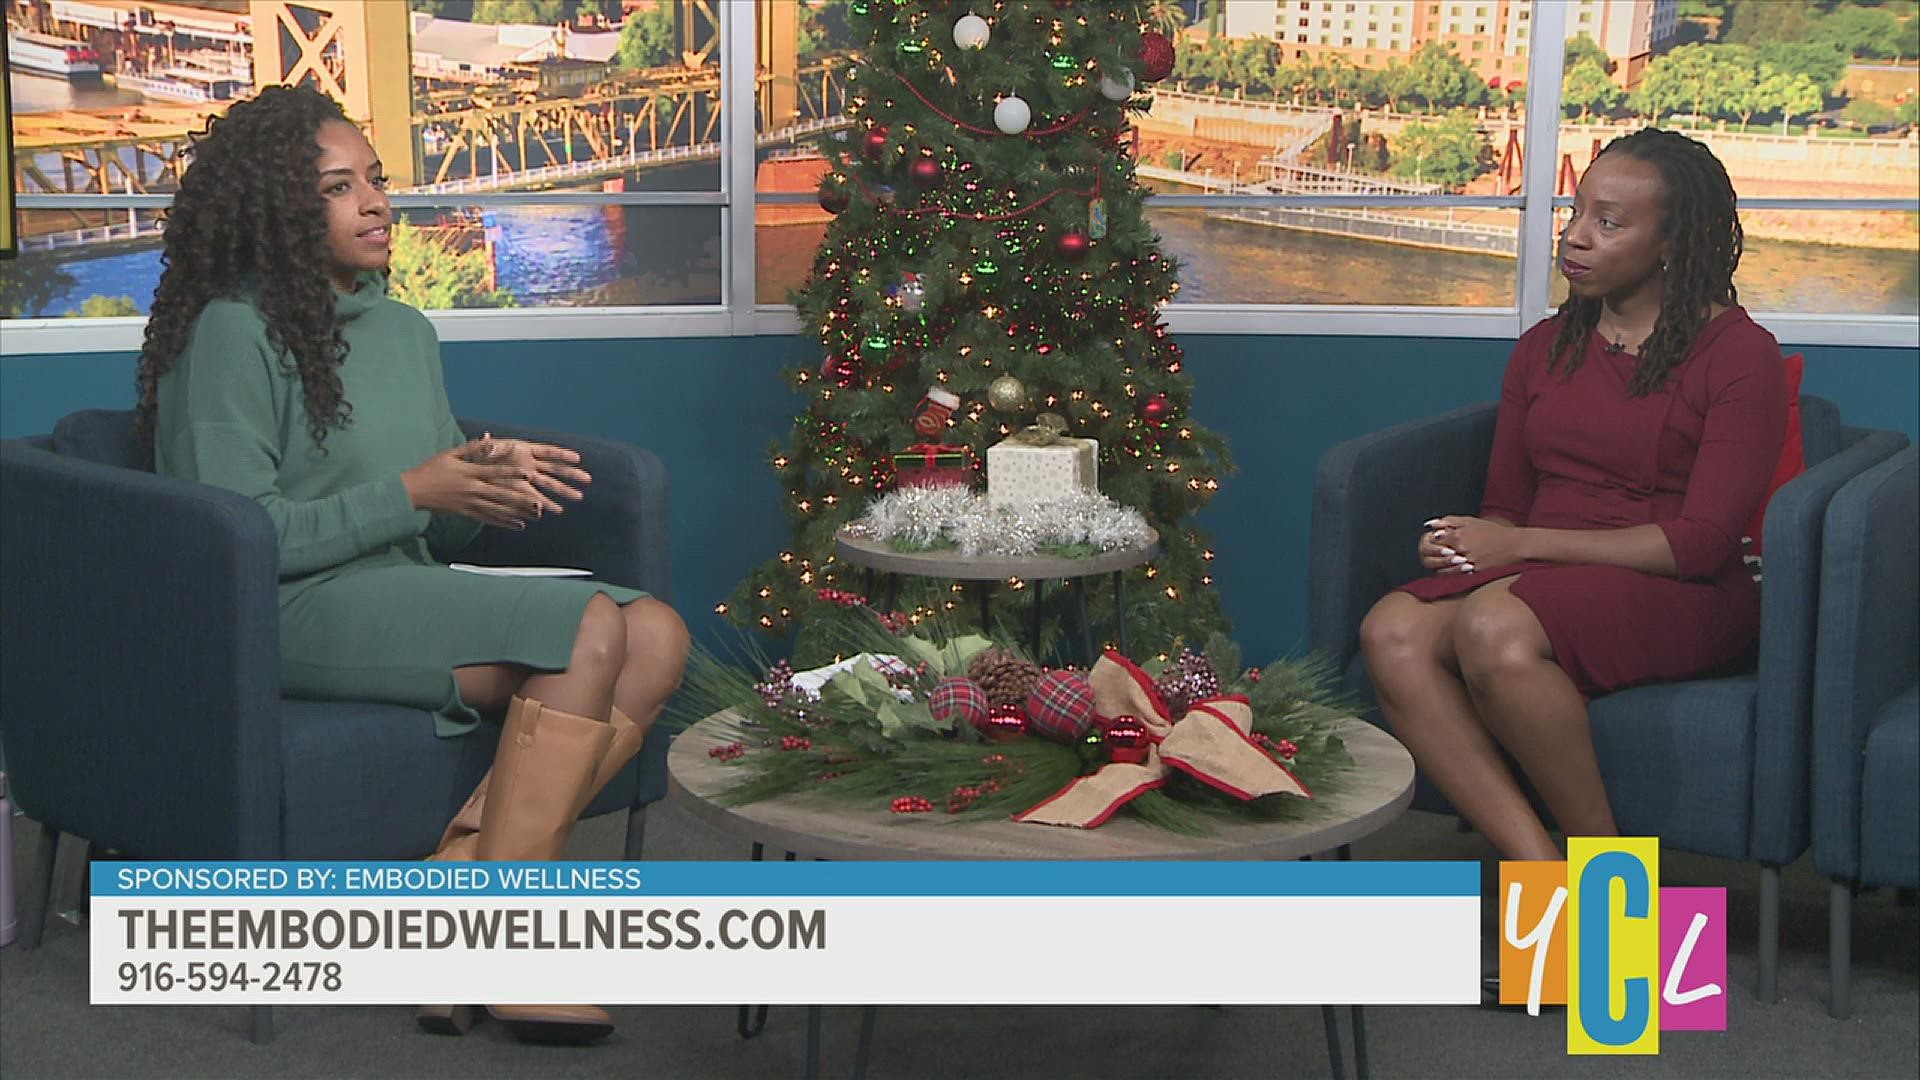 Instead of waiting until the New Year to set health goals, make them now with an alternative approach to weight loss. This segment paid for by Embodied Wellness.